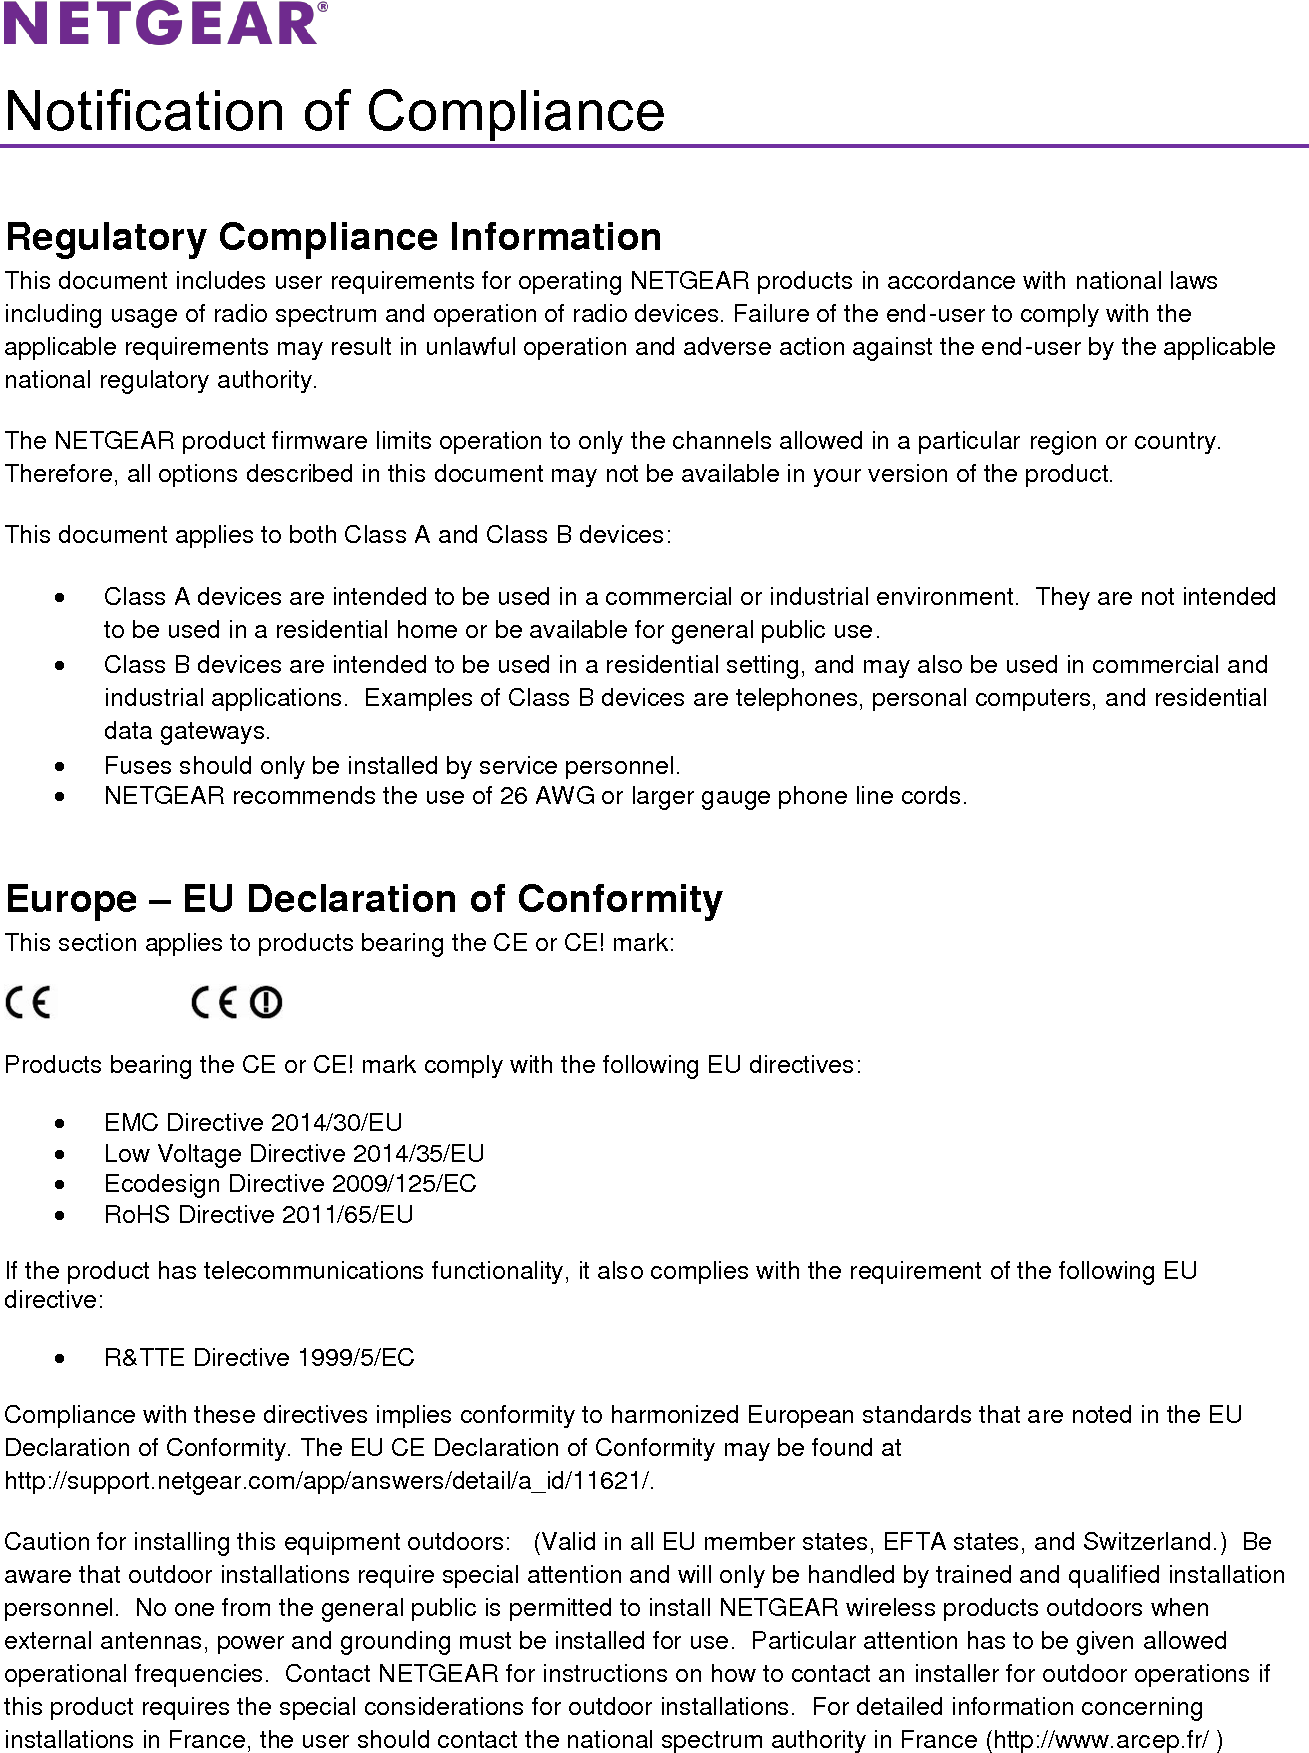   Notification of Compliance Regulatory Compliance Information This document includes user requirements for operating NETGEAR products in accordance with national laws including usage of radio spectrum and operation of radio devices. Failure of the end-user to comply with the applicable requirements may result in unlawful operation and adverse action against the end-user by the applicable national regulatory authority. The NETGEAR product firmware limits operation to only the channels allowed in a particular region or country. Therefore, all options described in this document may not be available in your version of the product. This document applies to both Class A and Class B devices:   Class A devices are intended to be used in a commercial or industrial environment.  They are not intended to be used in a residential home or be available for general public use.   Class B devices are intended to be used in a residential setting, and may also be used in commercial and industrial applications.  Examples of Class B devices are telephones, personal computers, and residential data gateways.   Fuses should only be installed by service personnel.   NETGEAR recommends the use of 26 AWG or larger gauge phone line cords. Europe – EU Declaration of Conformity This section applies to products bearing the CE or CE! mark:                      Products bearing the CE or CE! mark comply with the following EU directives:   EMC Directive 2014/30/EU   Low Voltage Directive 2014/35/EU   Ecodesign Directive 2009/125/EC   RoHS Directive 2011/65/EU If the product has telecommunications functionality, it also complies with the requirement of the following EU directive:   R&amp;TTE Directive 1999/5/EC Compliance with these directives implies conformity to harmonized European standards that are noted in the EU Declaration of Conformity. The EU CE Declaration of Conformity may be found at http://support.netgear.com/app/answers/detail/a_id/11621/. Caution for installing this equipment outdoors:   (Valid in all EU member states, EFTA states, and Switzerland.)  Be aware that outdoor installations require special attention and will only be handled by trained and qualified installation personnel.  No one from the general public is permitted to install NETGEAR wireless products outdoors when external antennas, power and grounding must be installed for use.  Particular attention has to be given allowed operational frequencies.  Contact NETGEAR for instructions on how to contact an installer for outdoor operations if this product requires the special considerations for outdoor installations.  For detailed information concerning installations in France, the user should contact the national spectrum authority in France (http://www.arcep.fr/ ) 